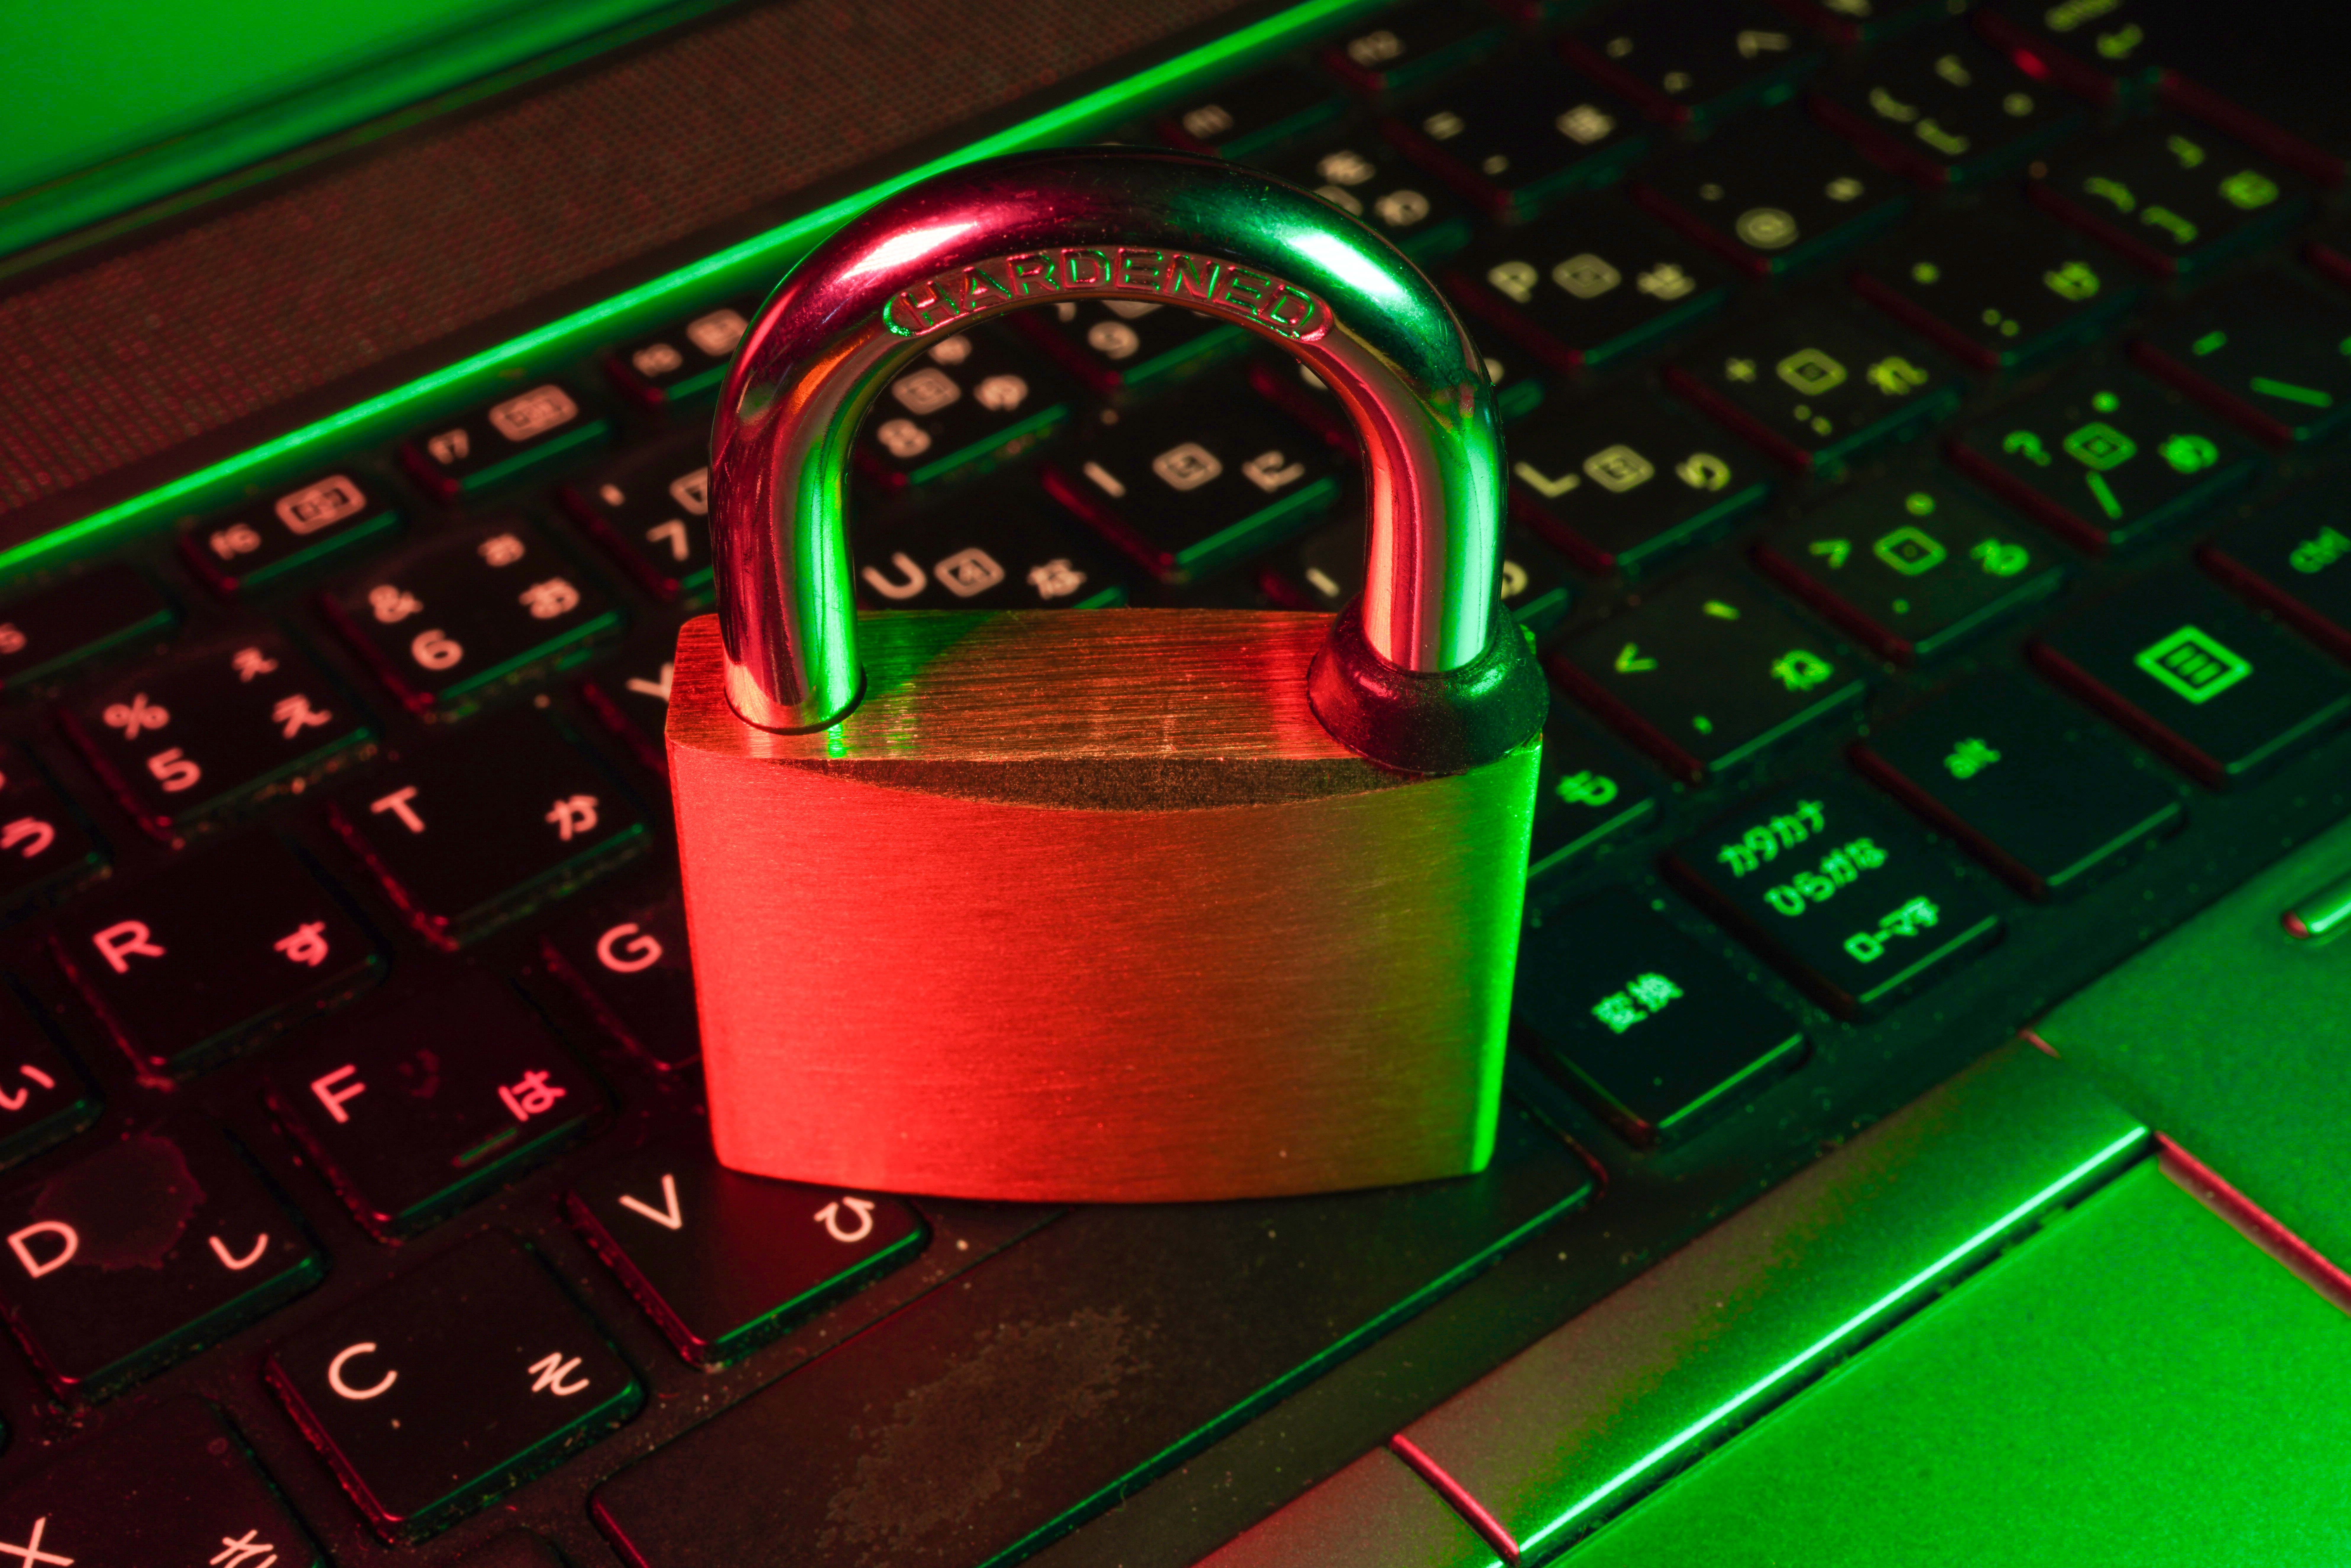 A padlock is shown on top of a computer keyboard.